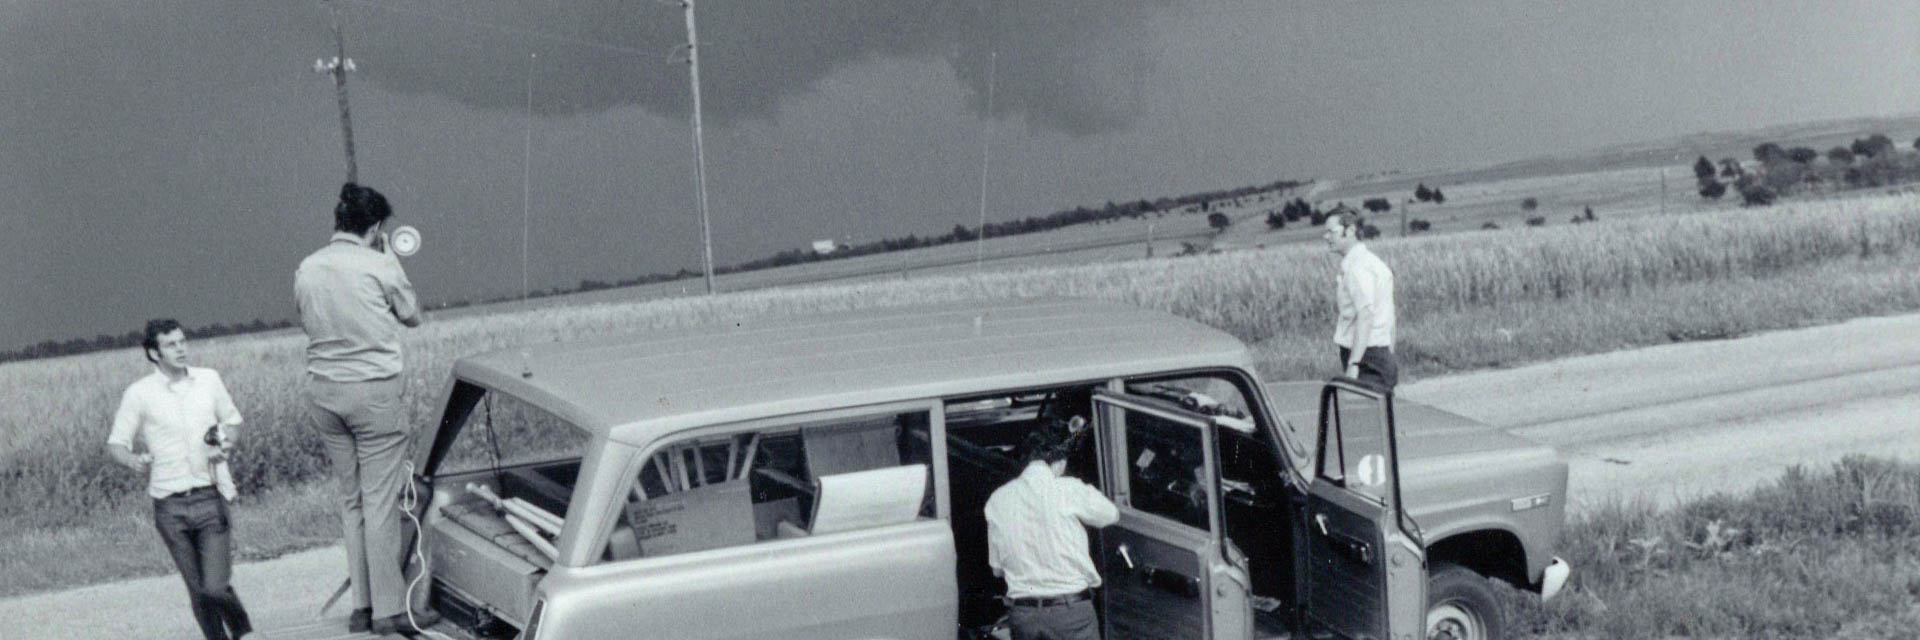 vintage black and white photo of people around a vehicle with equipment with storm clouds in the background